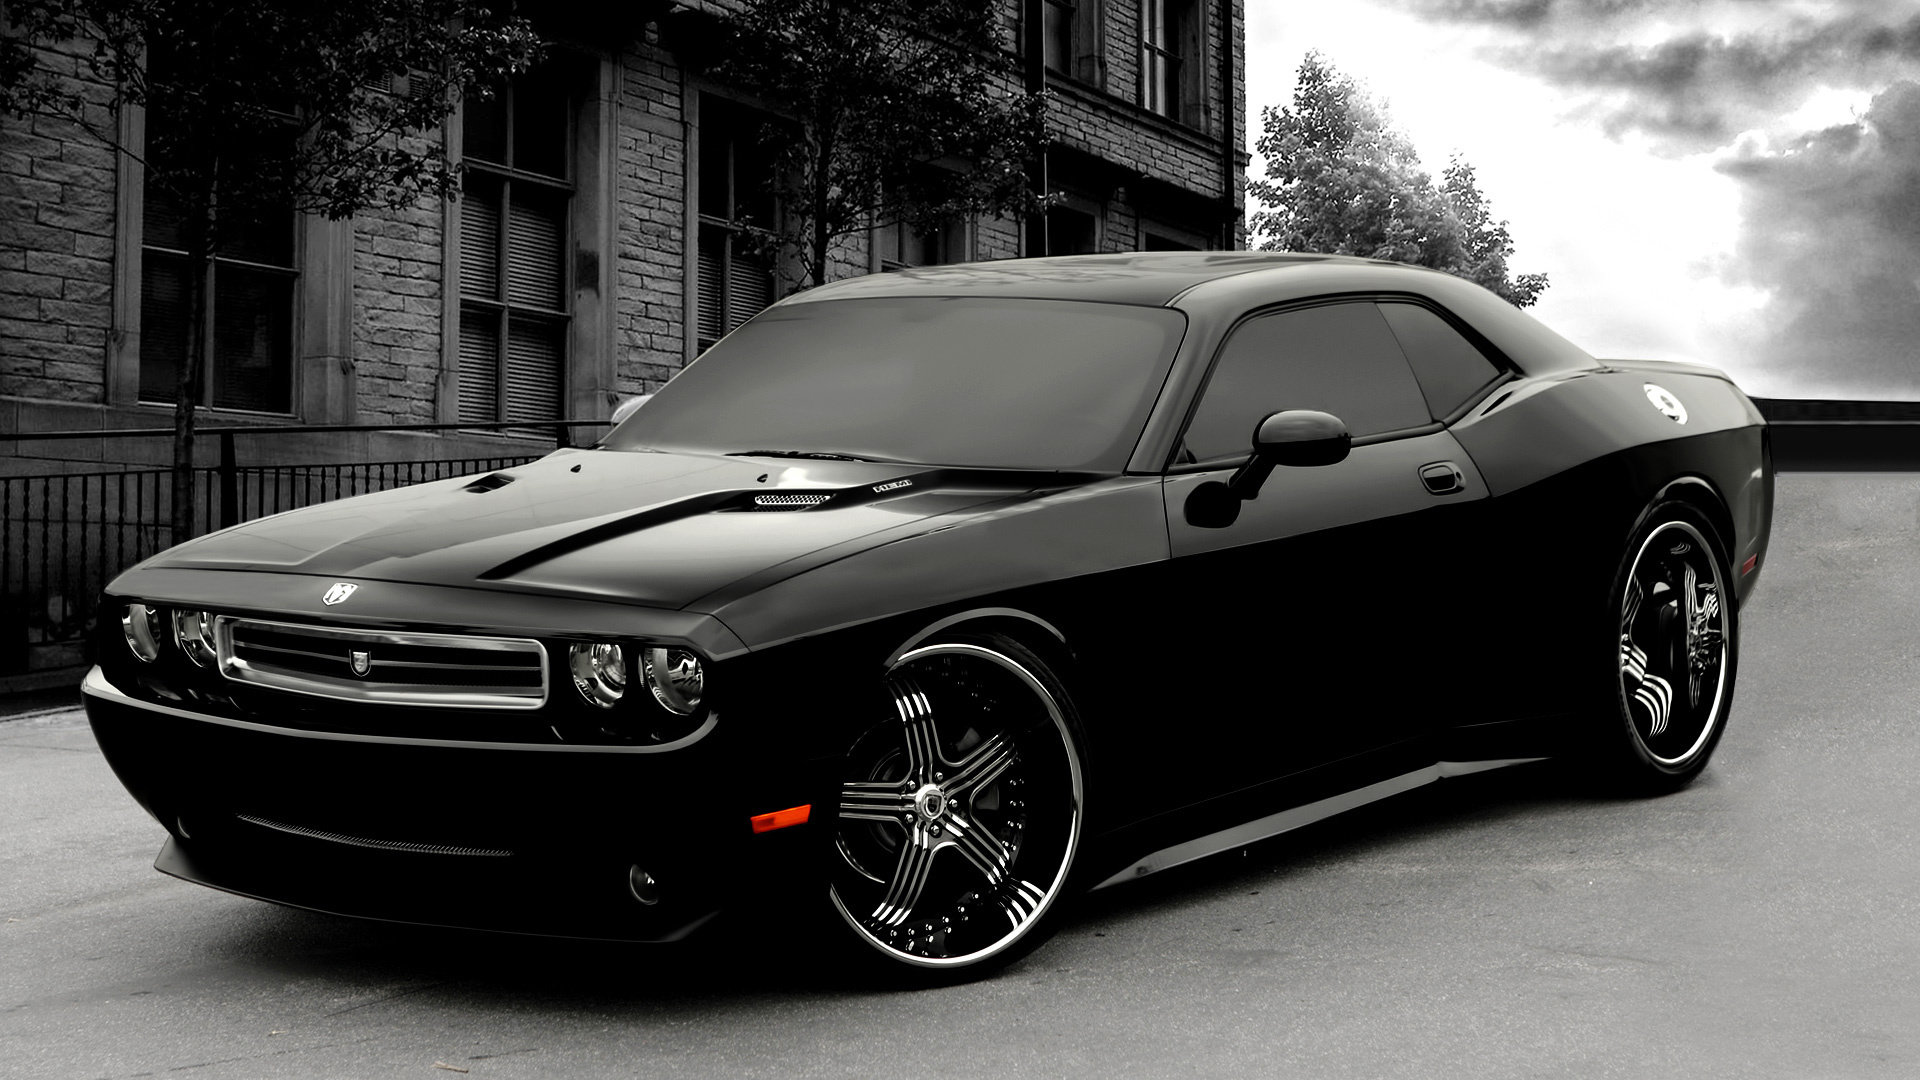 Best Dodge Challenger wallpaper ID:231685 for High Resolution 1080p PC